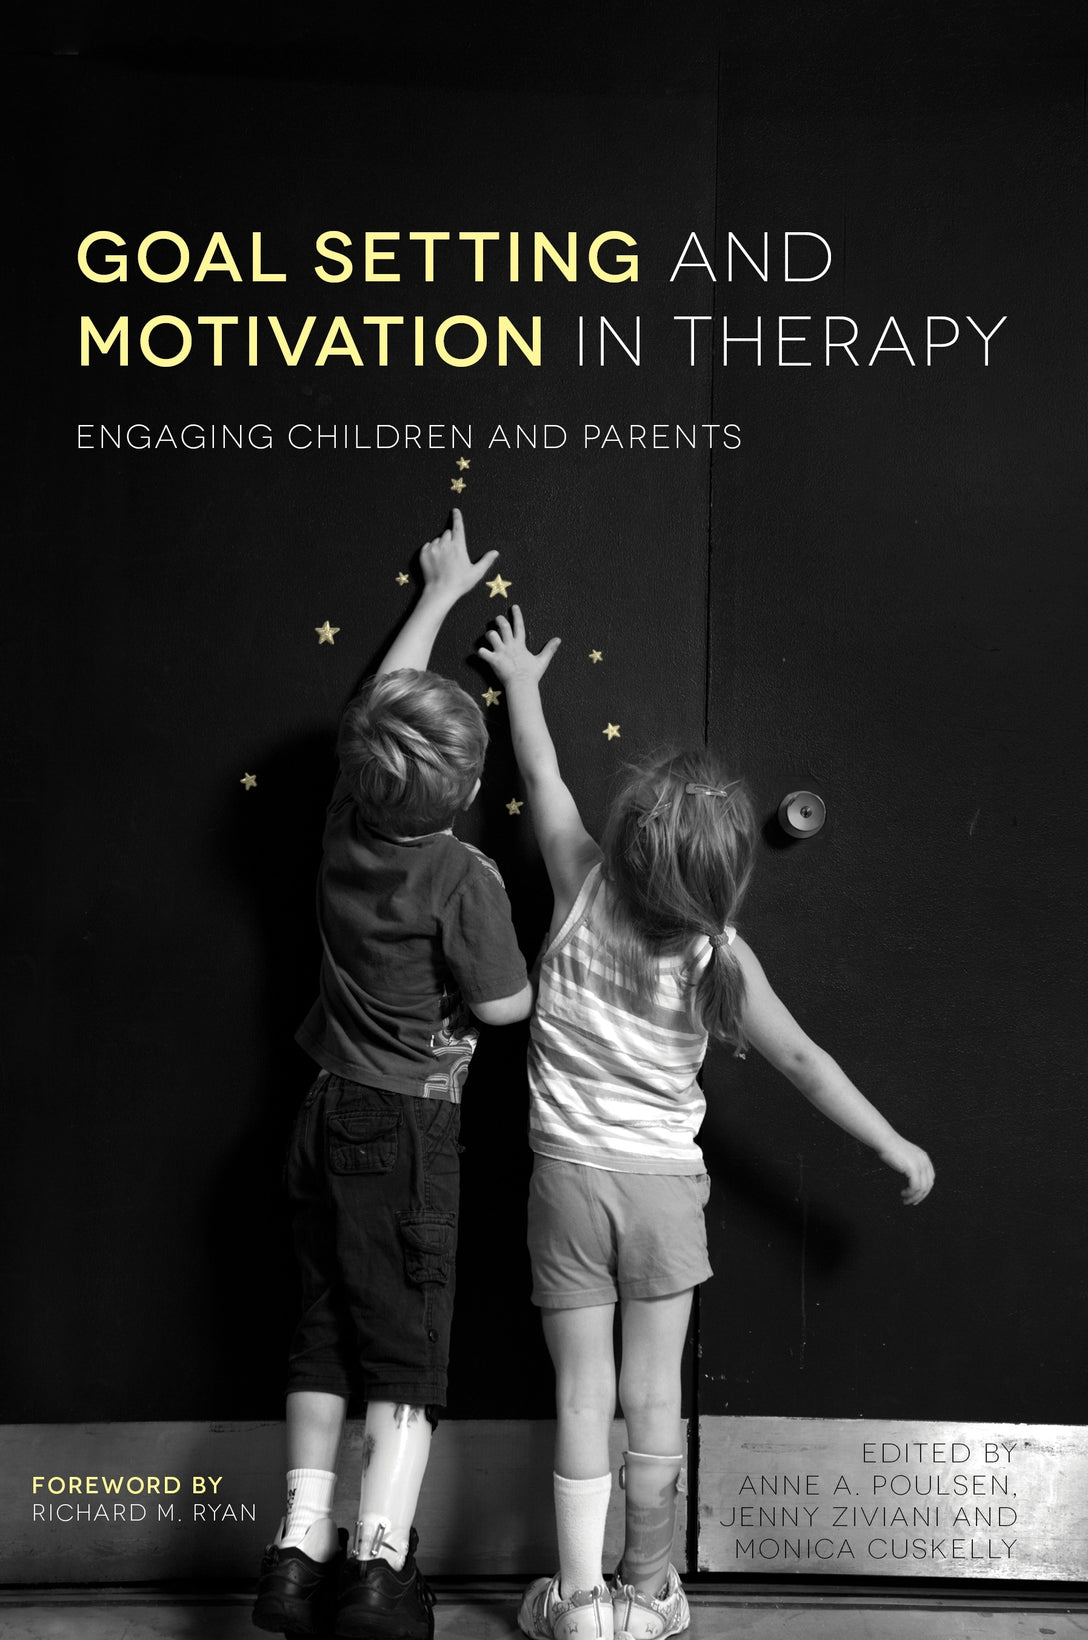 Goal Setting and Motivation in Therapy by Jenny Ziviani, Anne Poulsen, Monica Cuskelly, Richard Ryan, Richard M. Ryan, No Author Listed